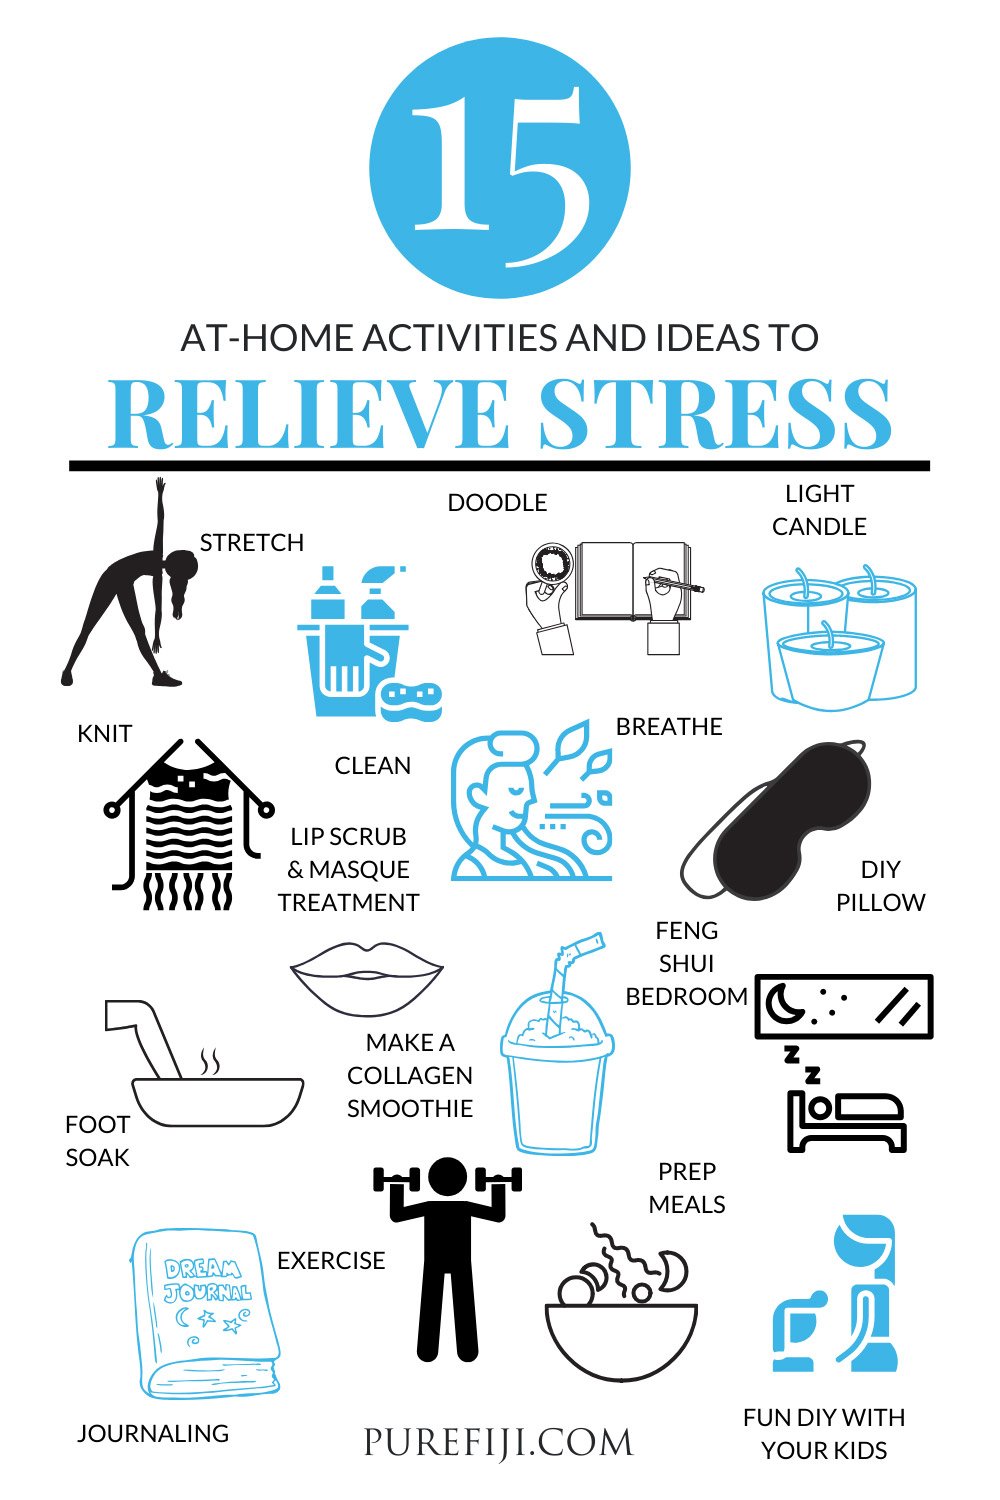 Stress relief at home